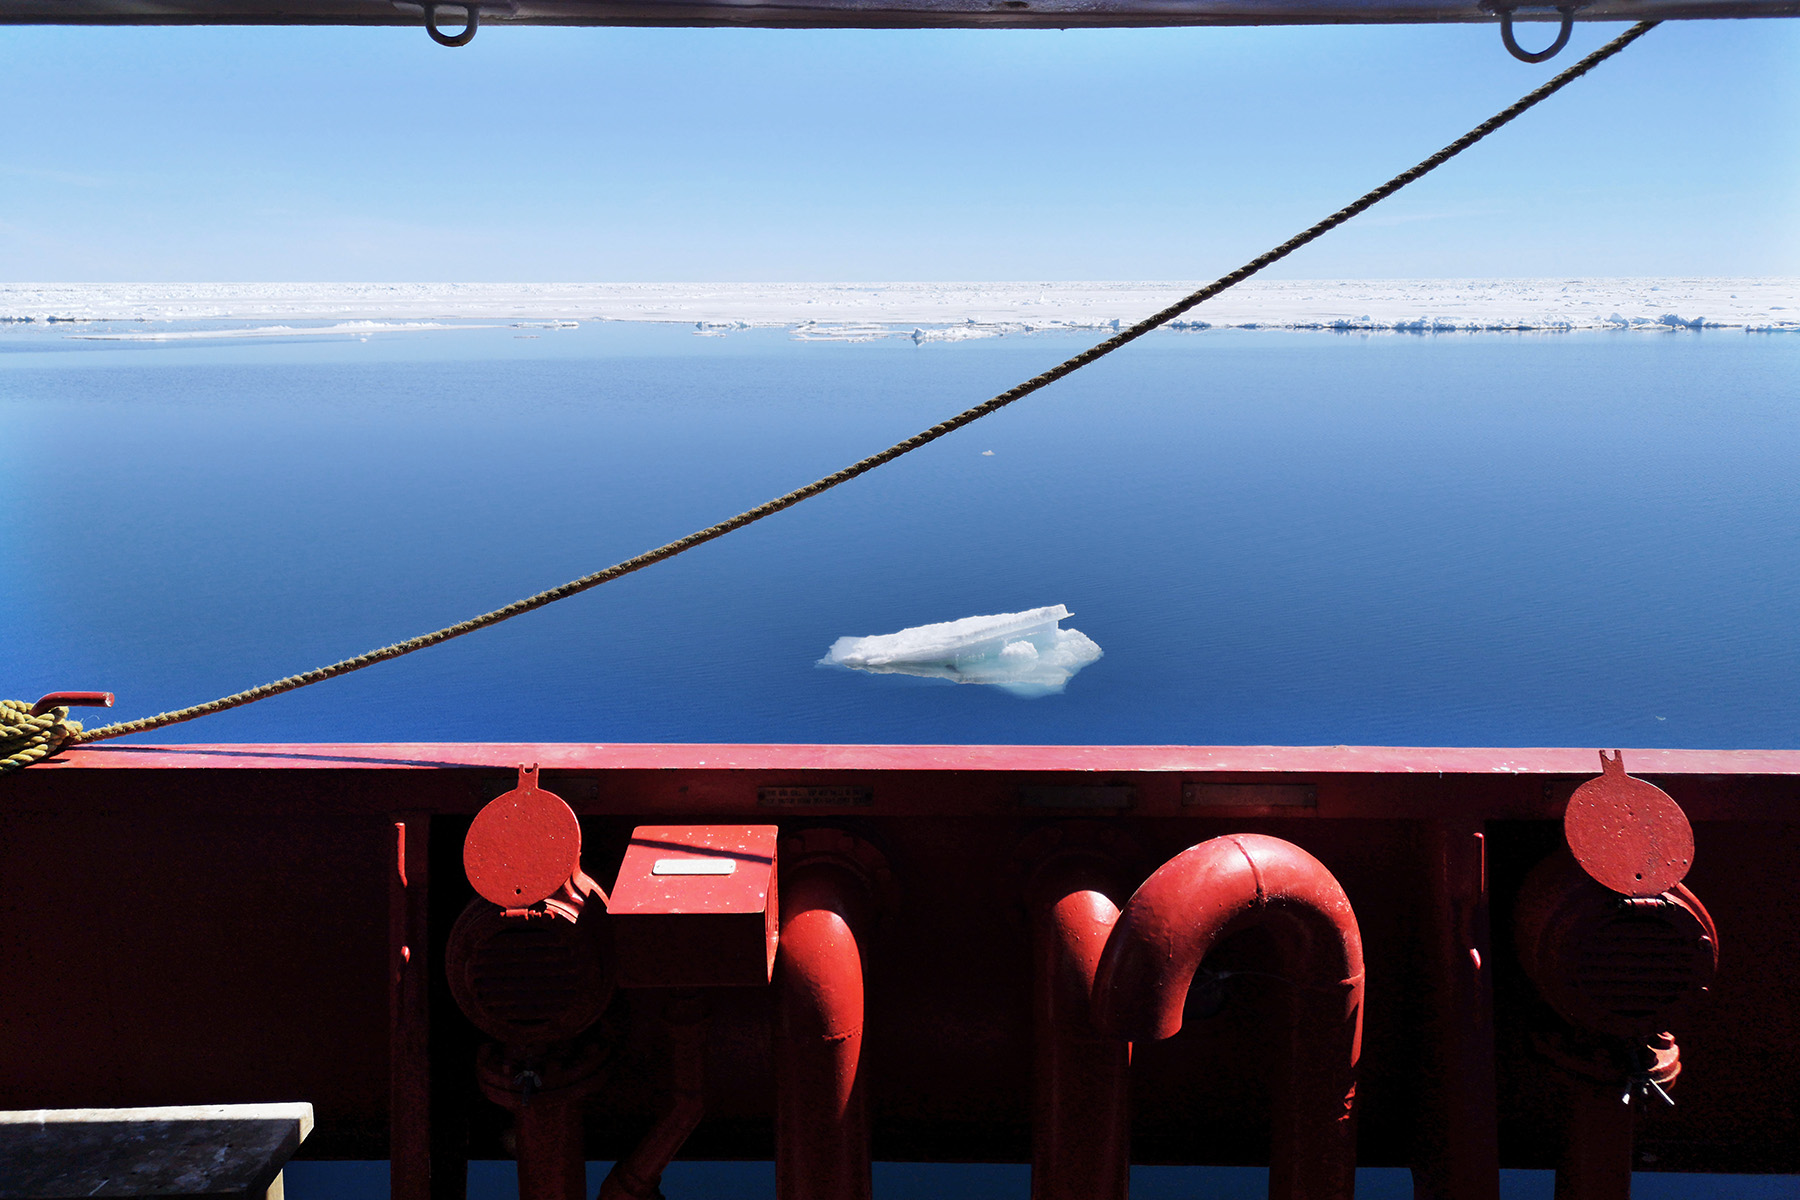  Canada, Nunavut, Kangiqsualuk Ilua (Hudson Bay), June 2018

Aboard the Amundsen, which is an icebreaker from the Canadian coastguard, which is also partly has been converted to a science lab. 
An international team of scientists specialised in sea i